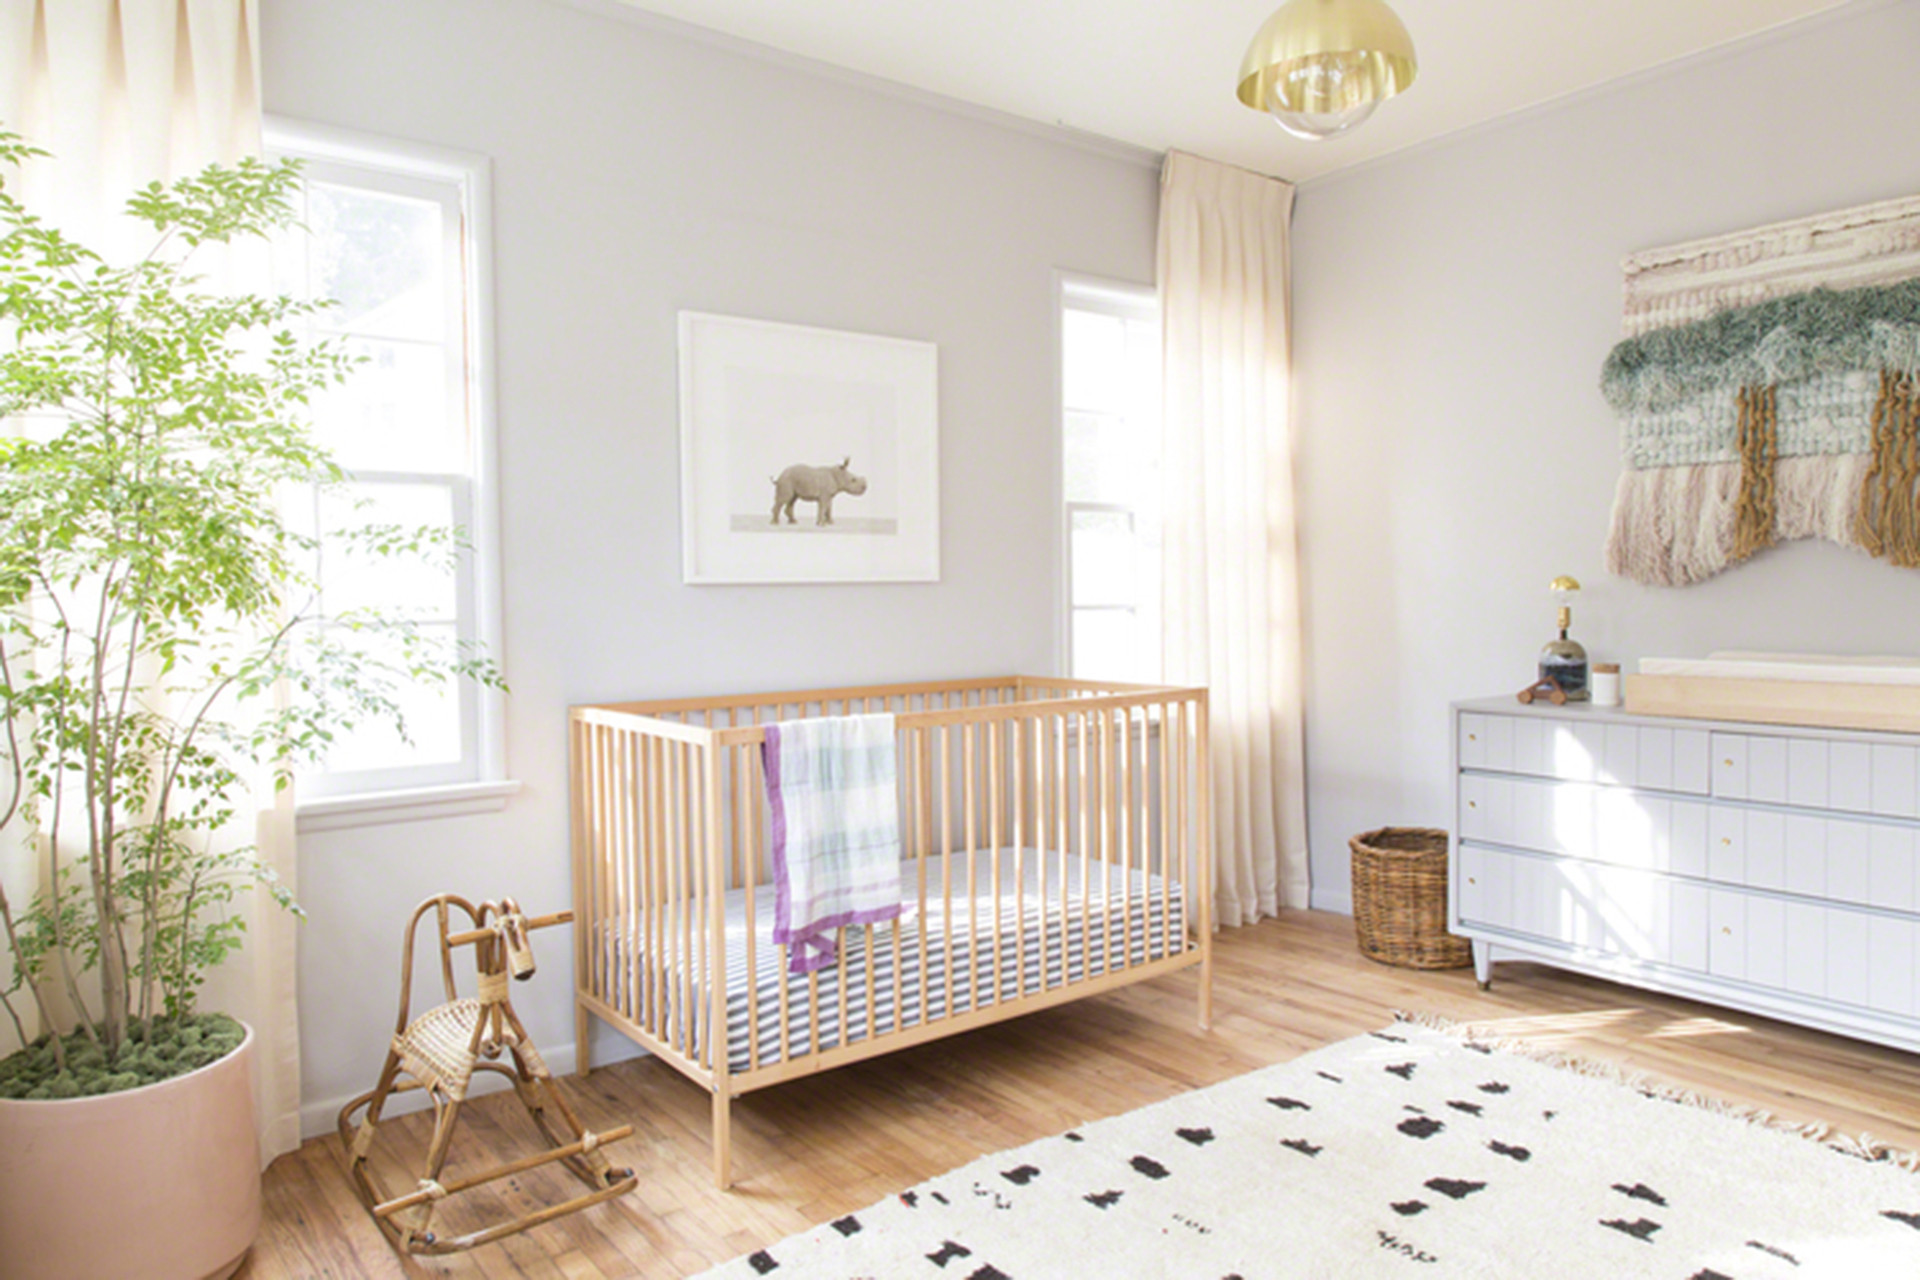 Baby Decor Rooms
 7 Hottest baby room trends for 2016 – SheKnows